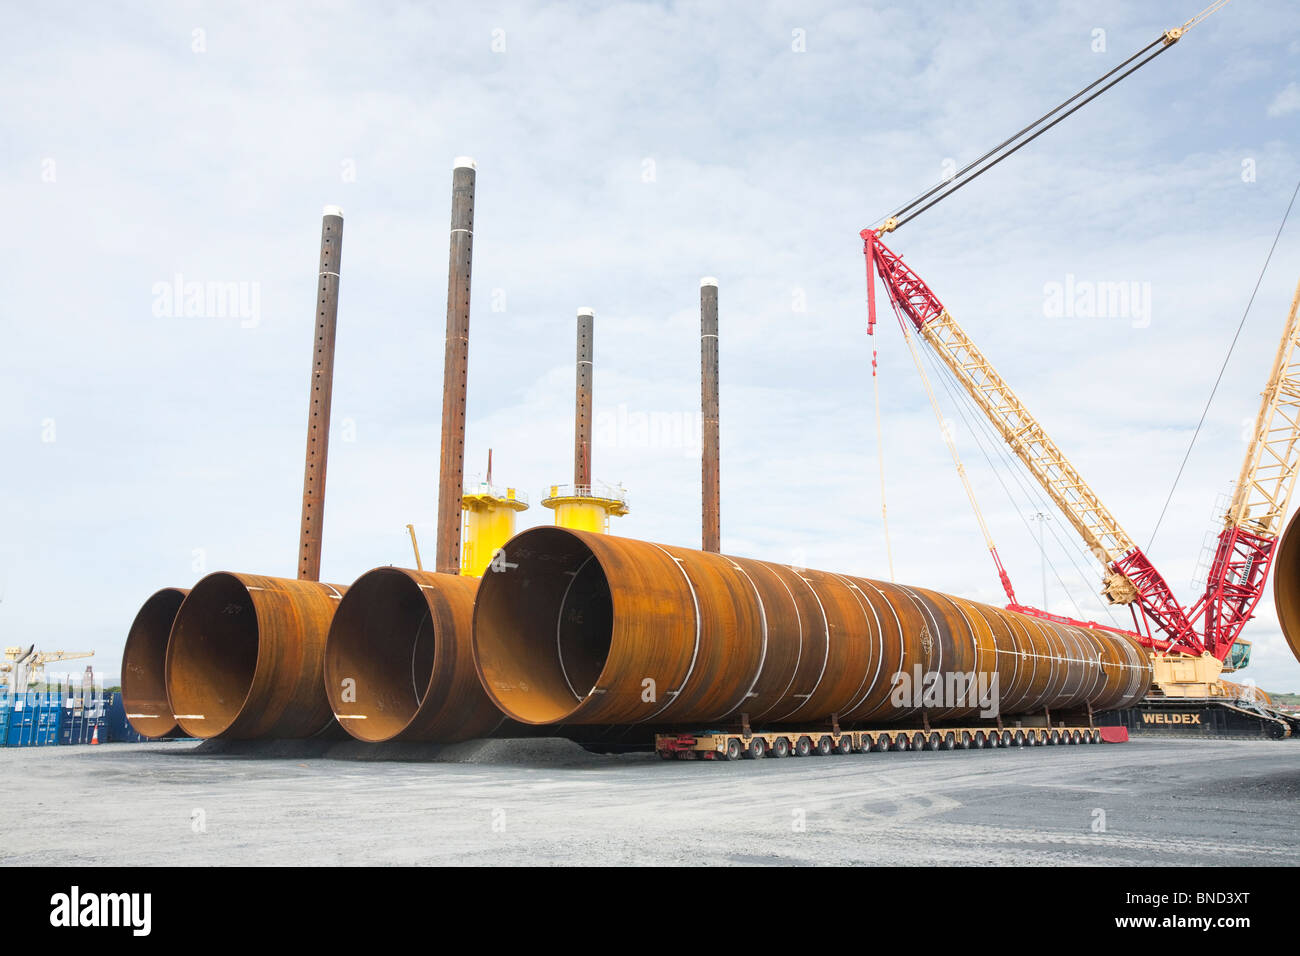 Monopiles waiting to be sunk into the seabed to support offshore wind turbines at Dong Energy's Walney Offshore wind farm. Stock Photo